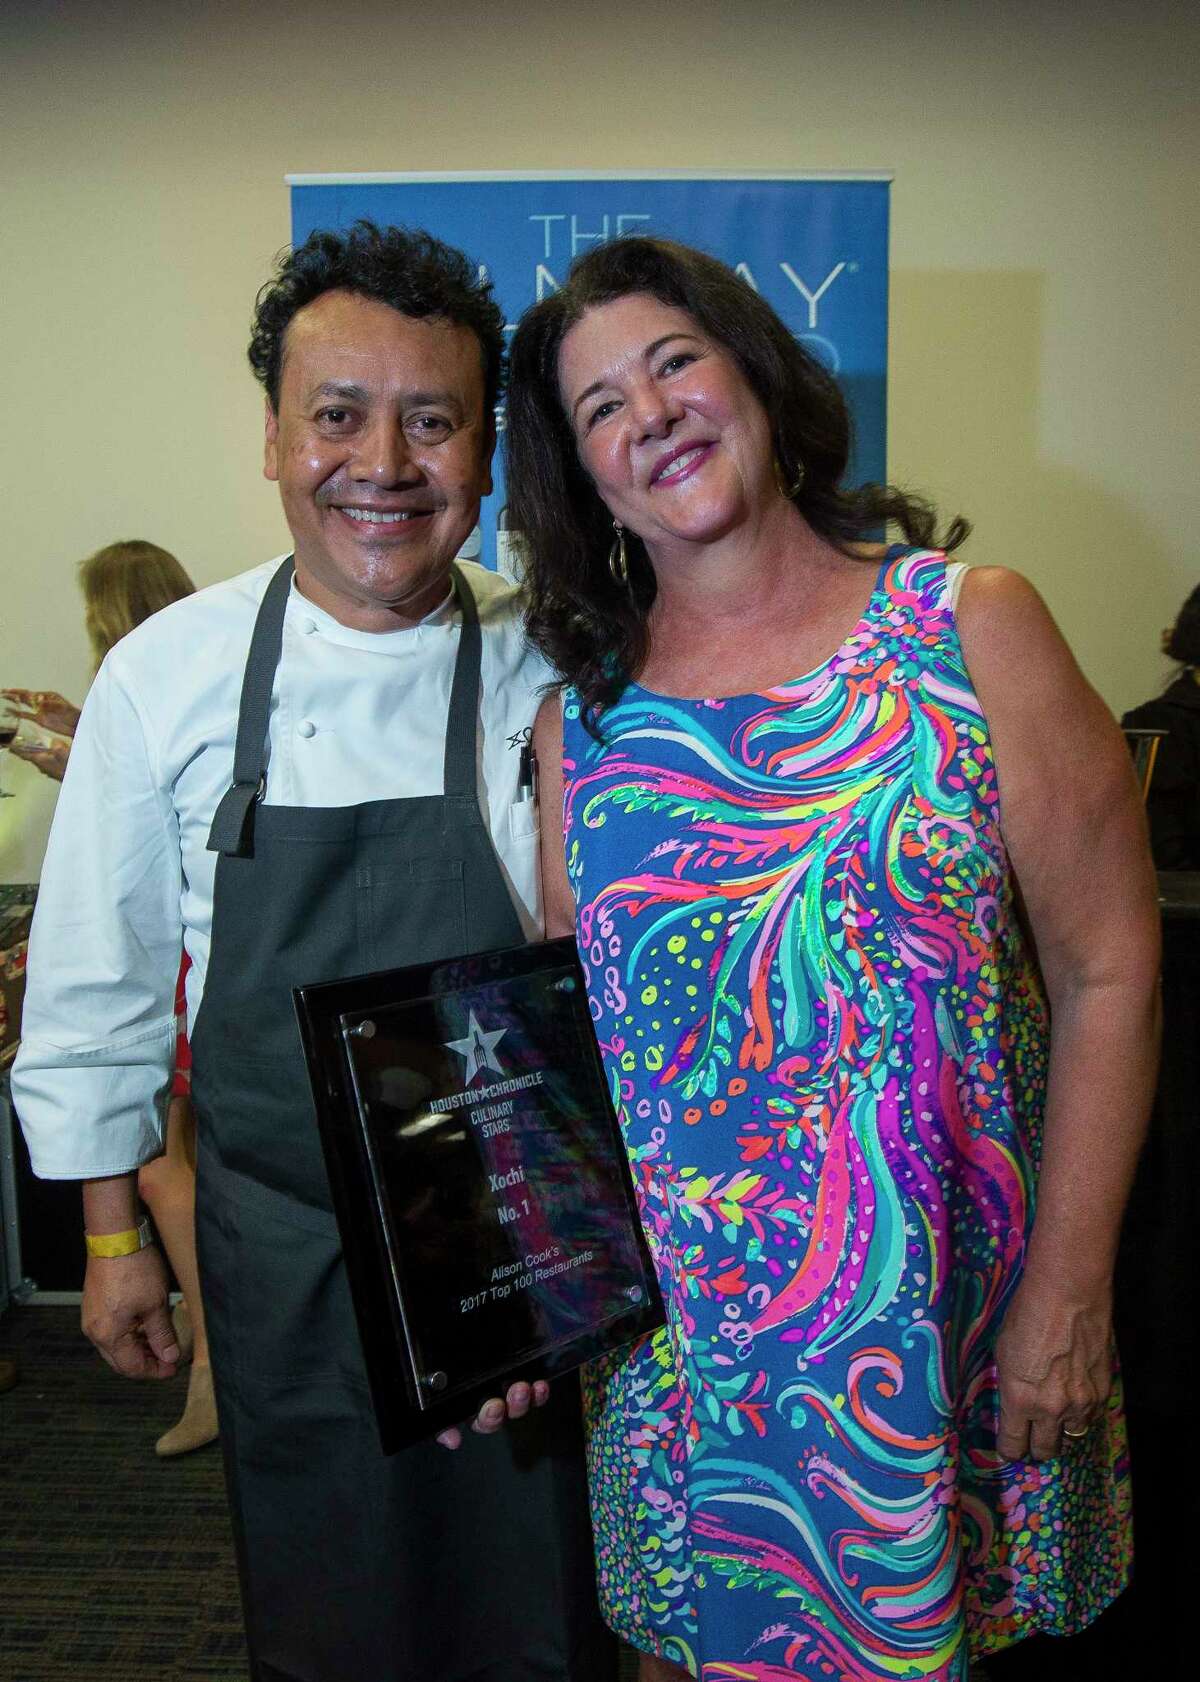 Hugo Ortega and his wife Tracy Vaught at the Top 100 Culinary Stars event at the Houston Chronicle on Thursday, Oct. 27, 2017, in Houston.